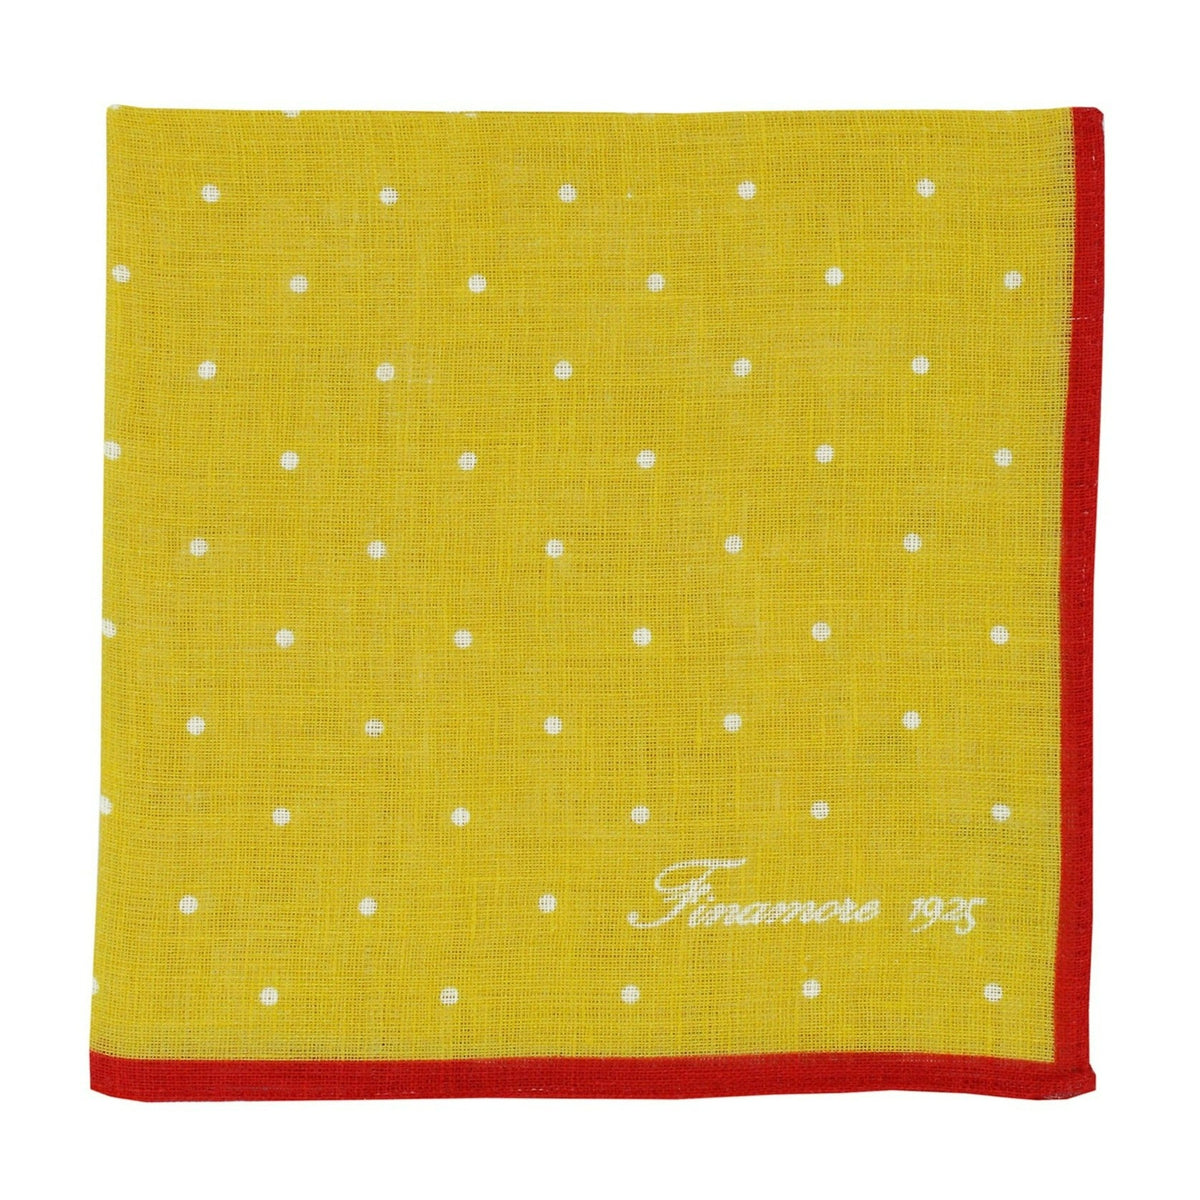 Linen pocket square with ochre background and red border